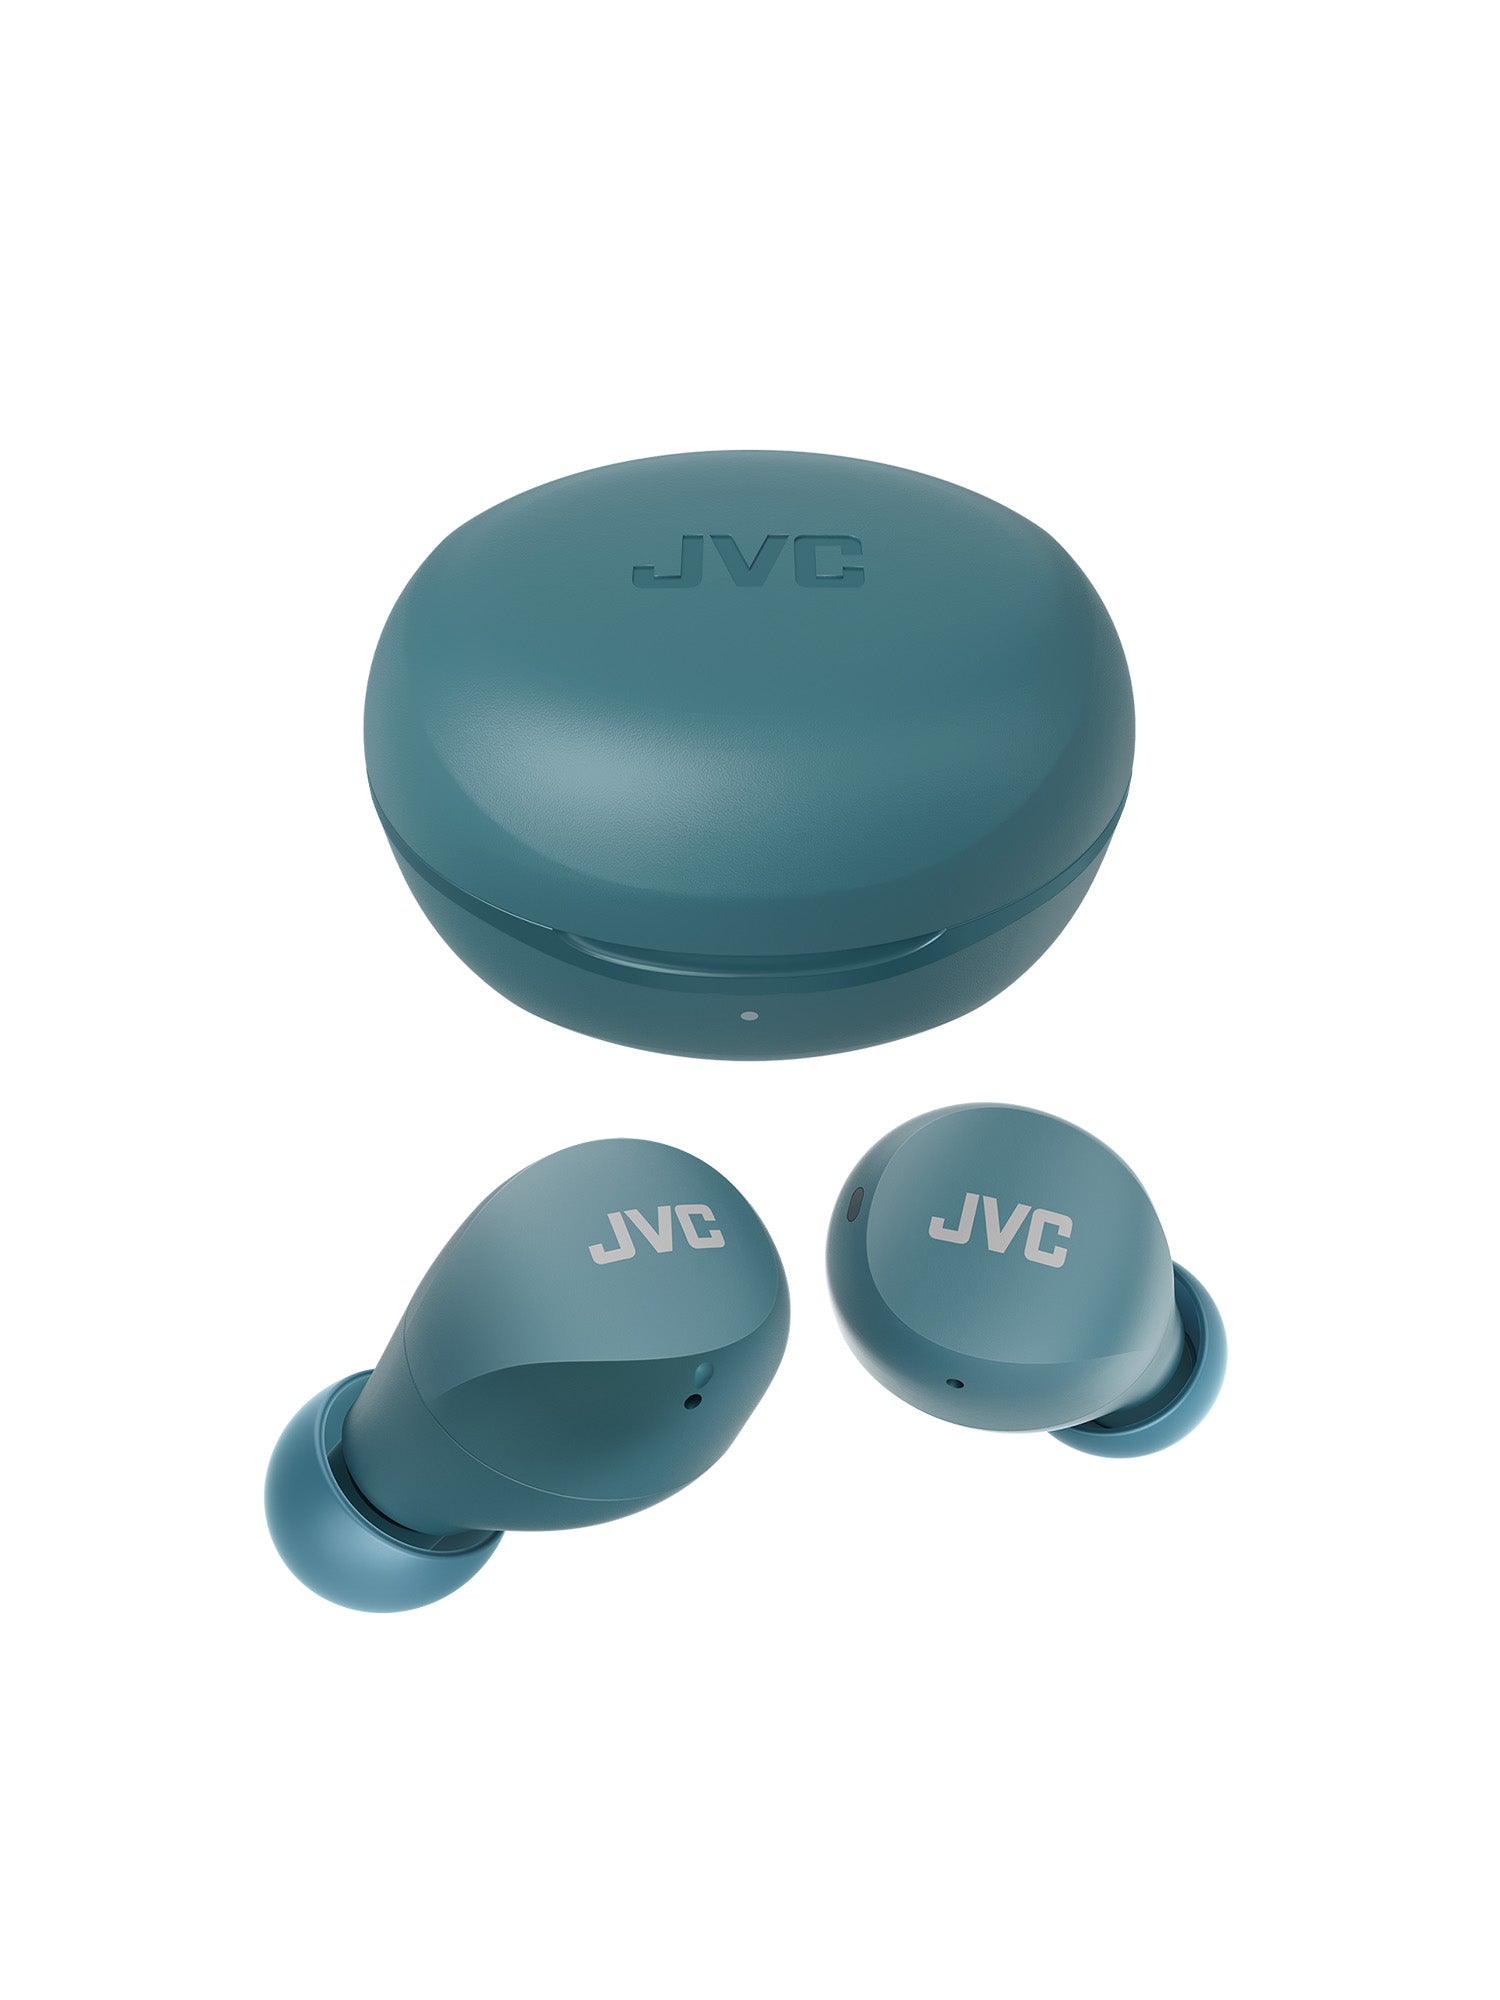 HA-A6T-G in Green Gumy mini wireless earbuds & charger by JVC